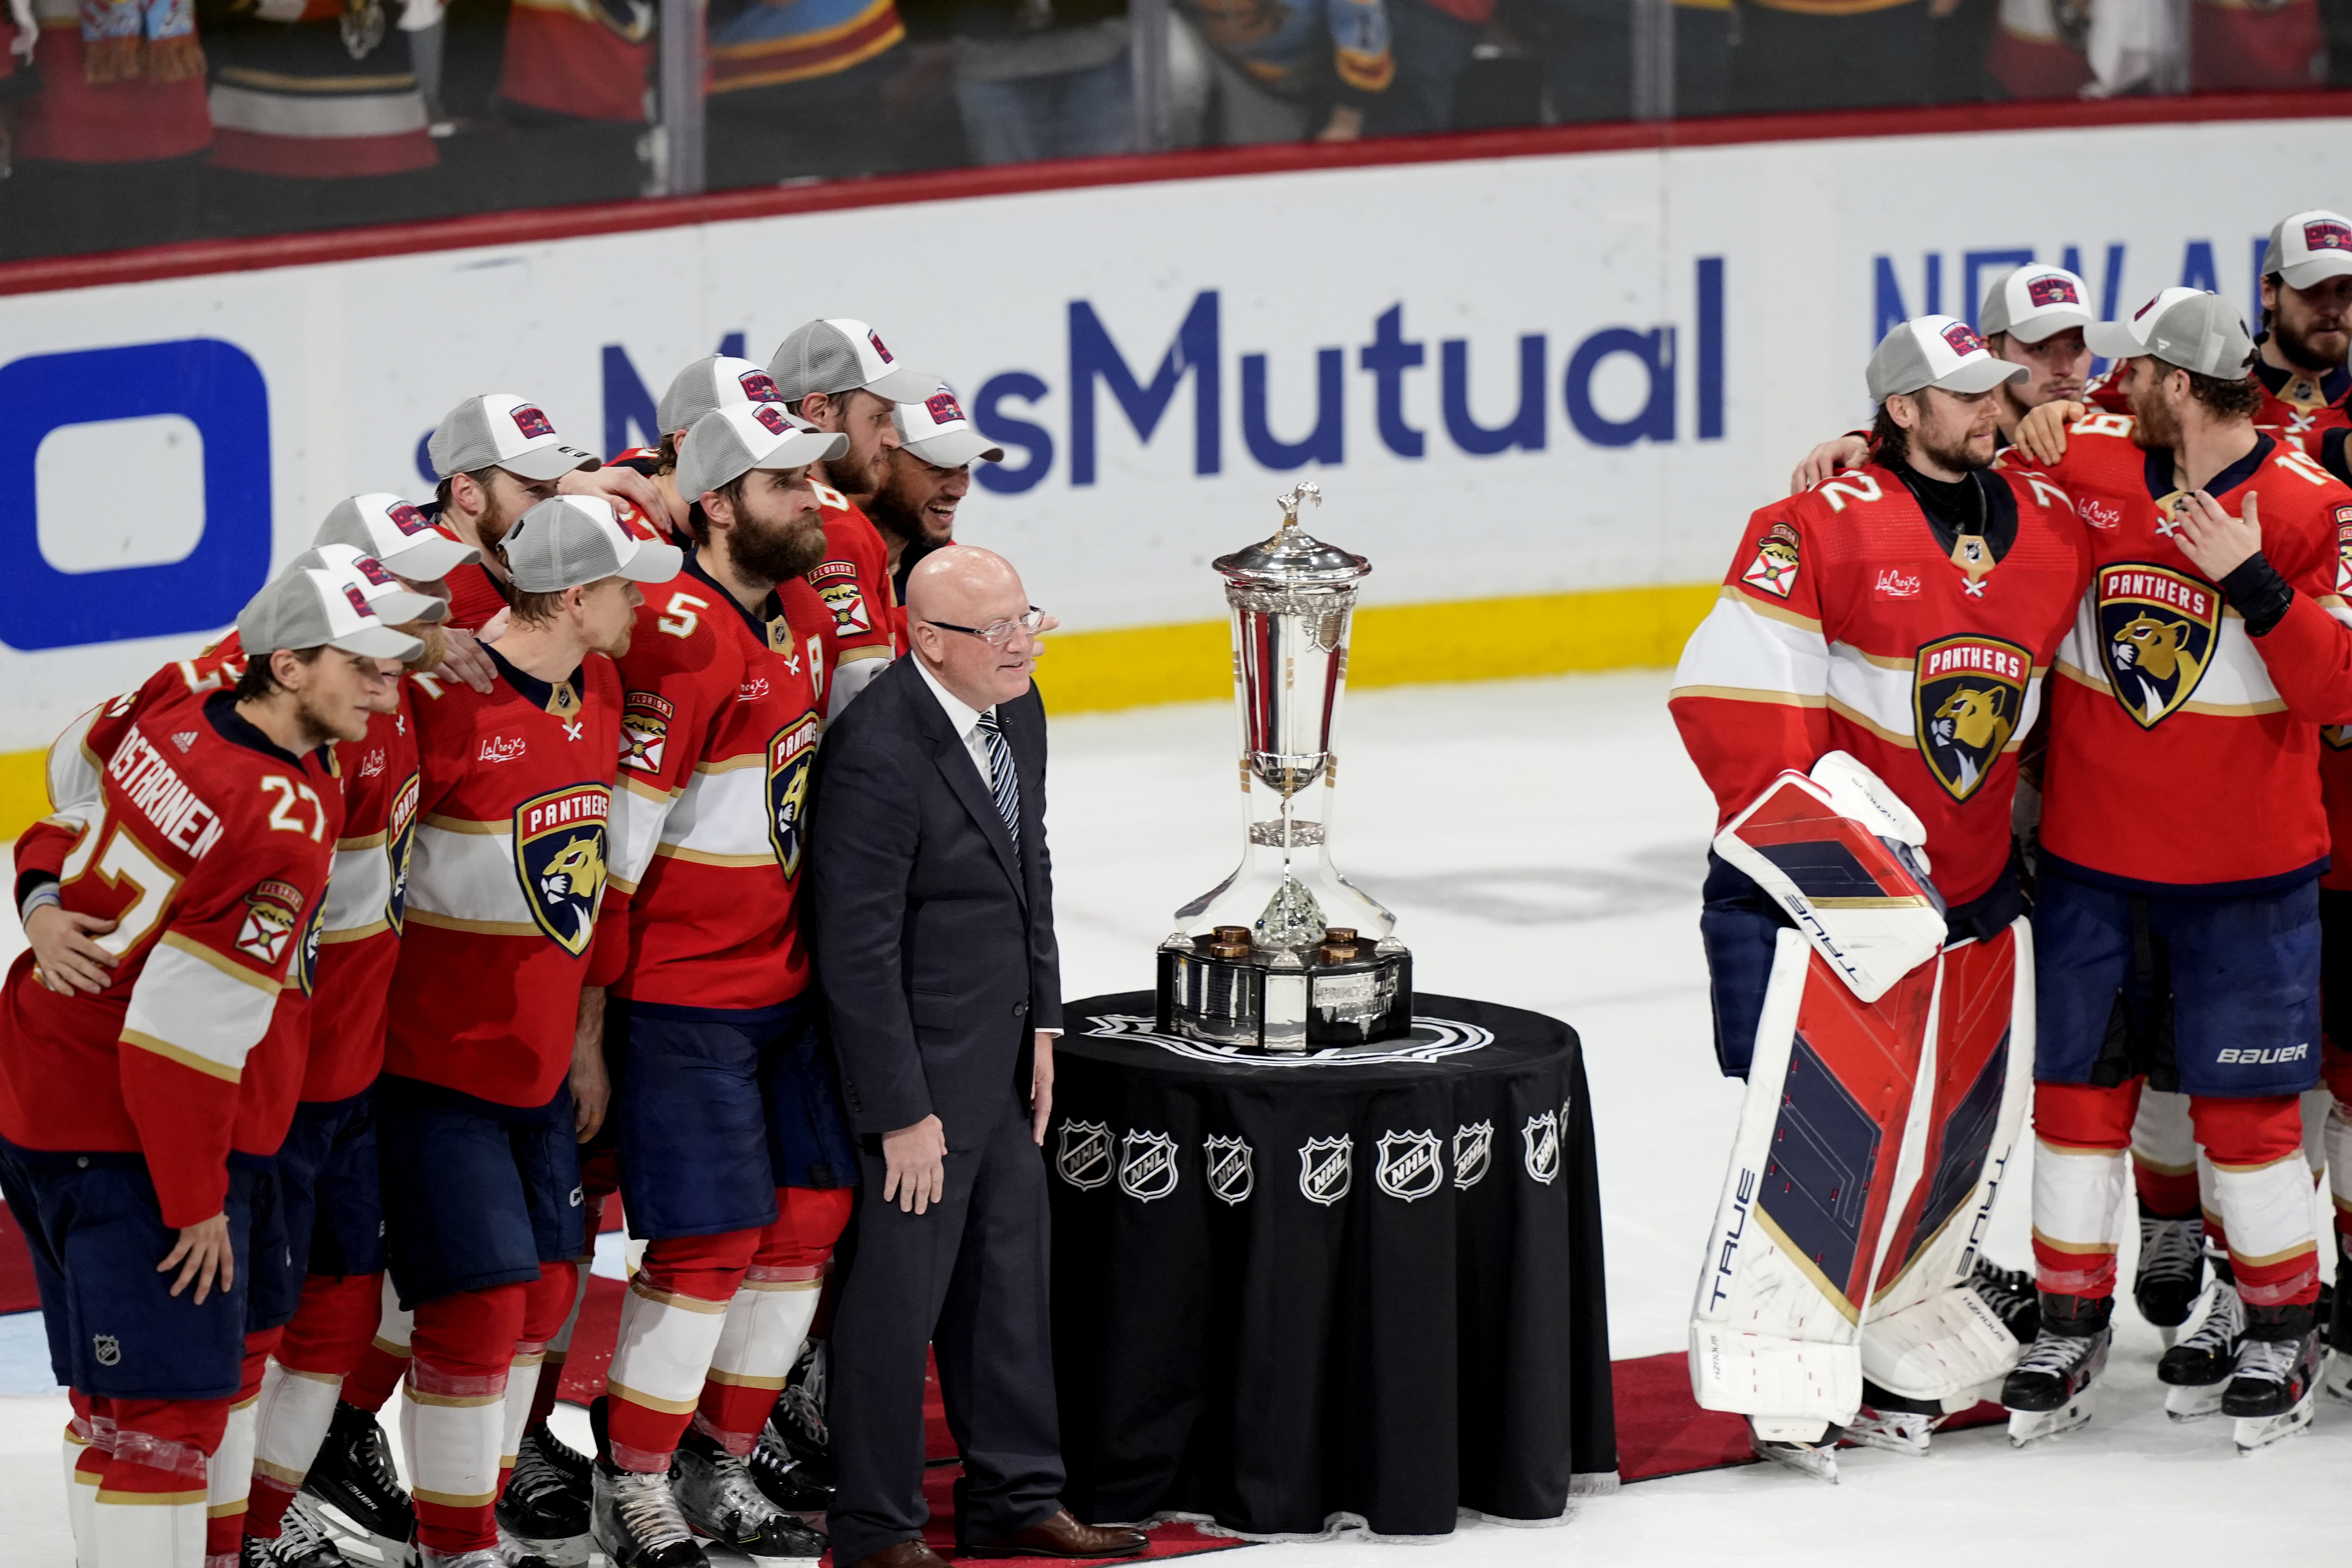 Stanley Cup Final preview: Edmonton Oilers vs. Florida Panthers schedule, predictions, how teams stack up and more